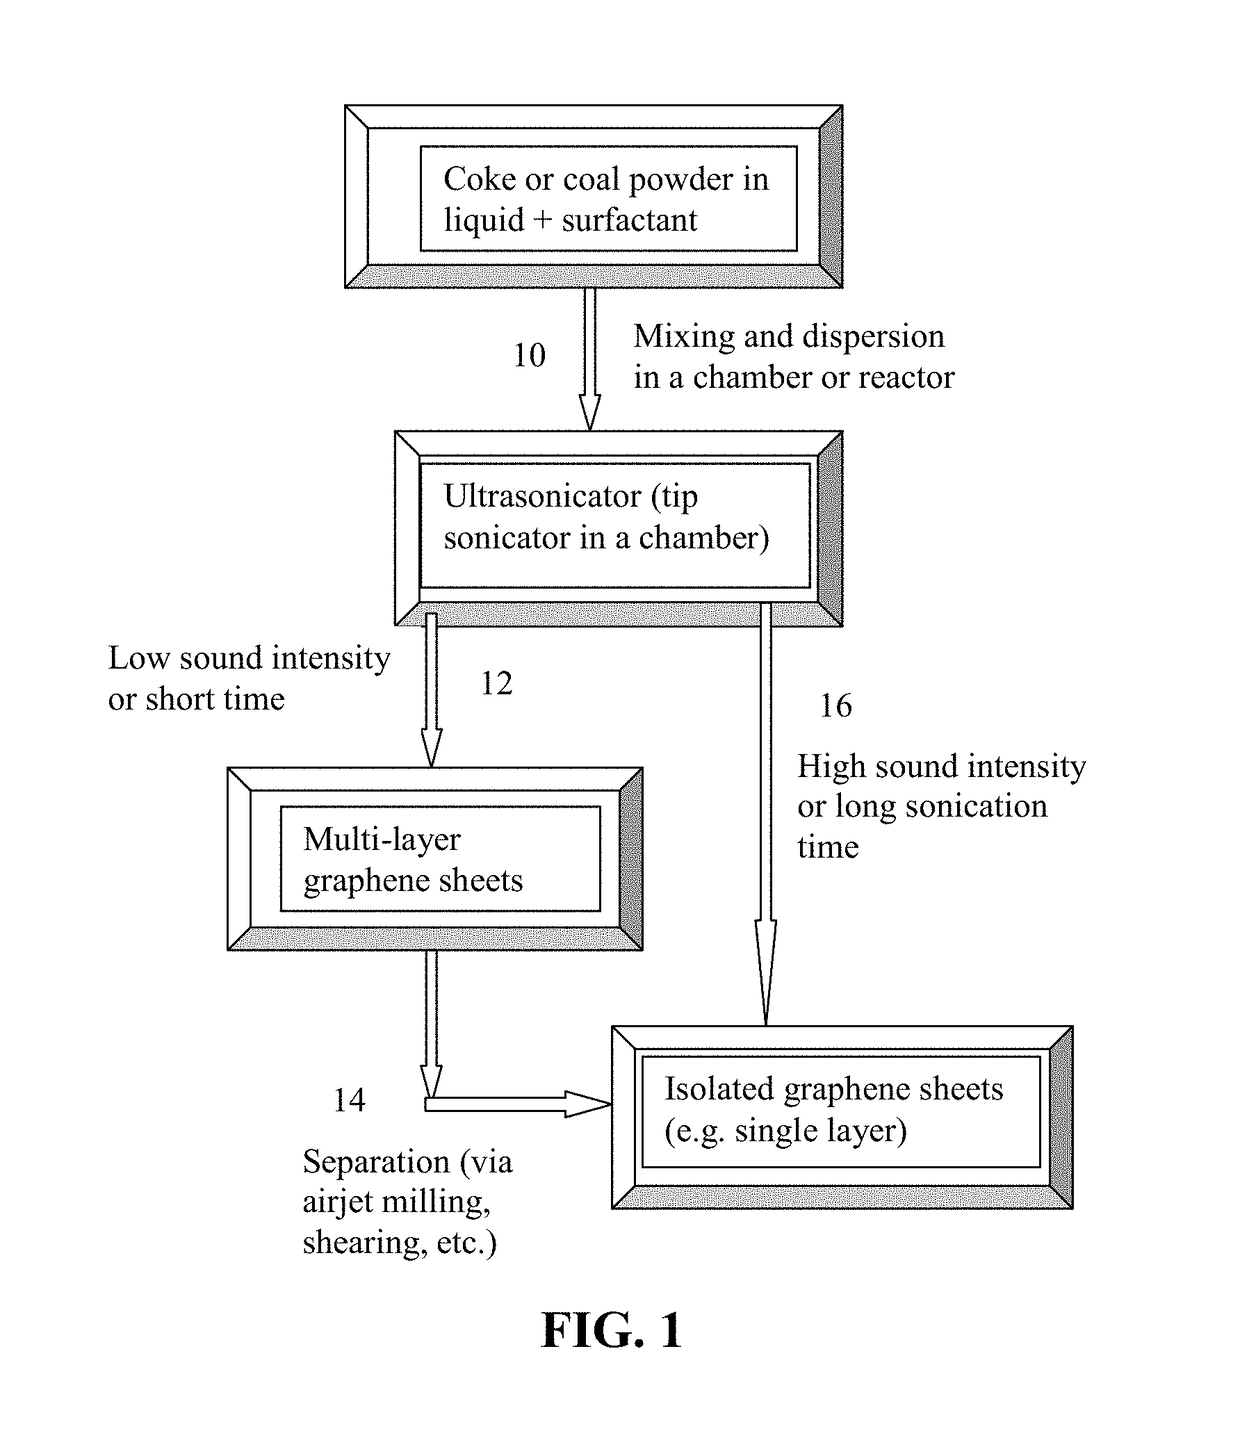 Direct Ultrasonication Production of Graphene Sheets from Coke or Coal